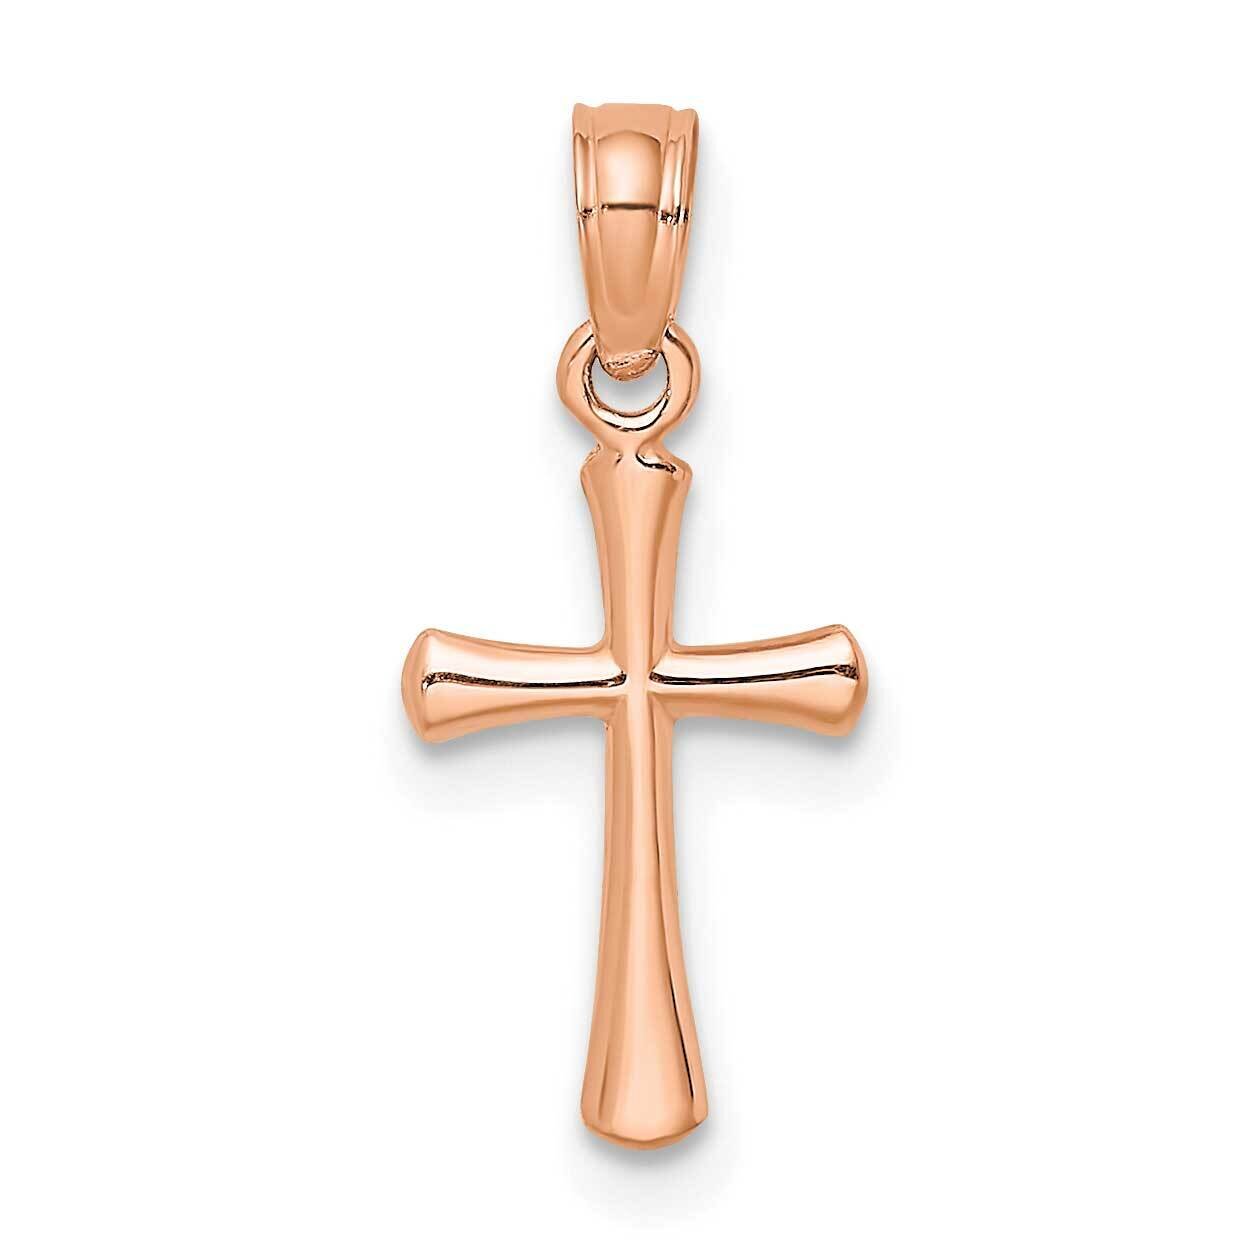 Polished Beveled Cross with Round Tips Charm 10k Rose Gold 10K8539R